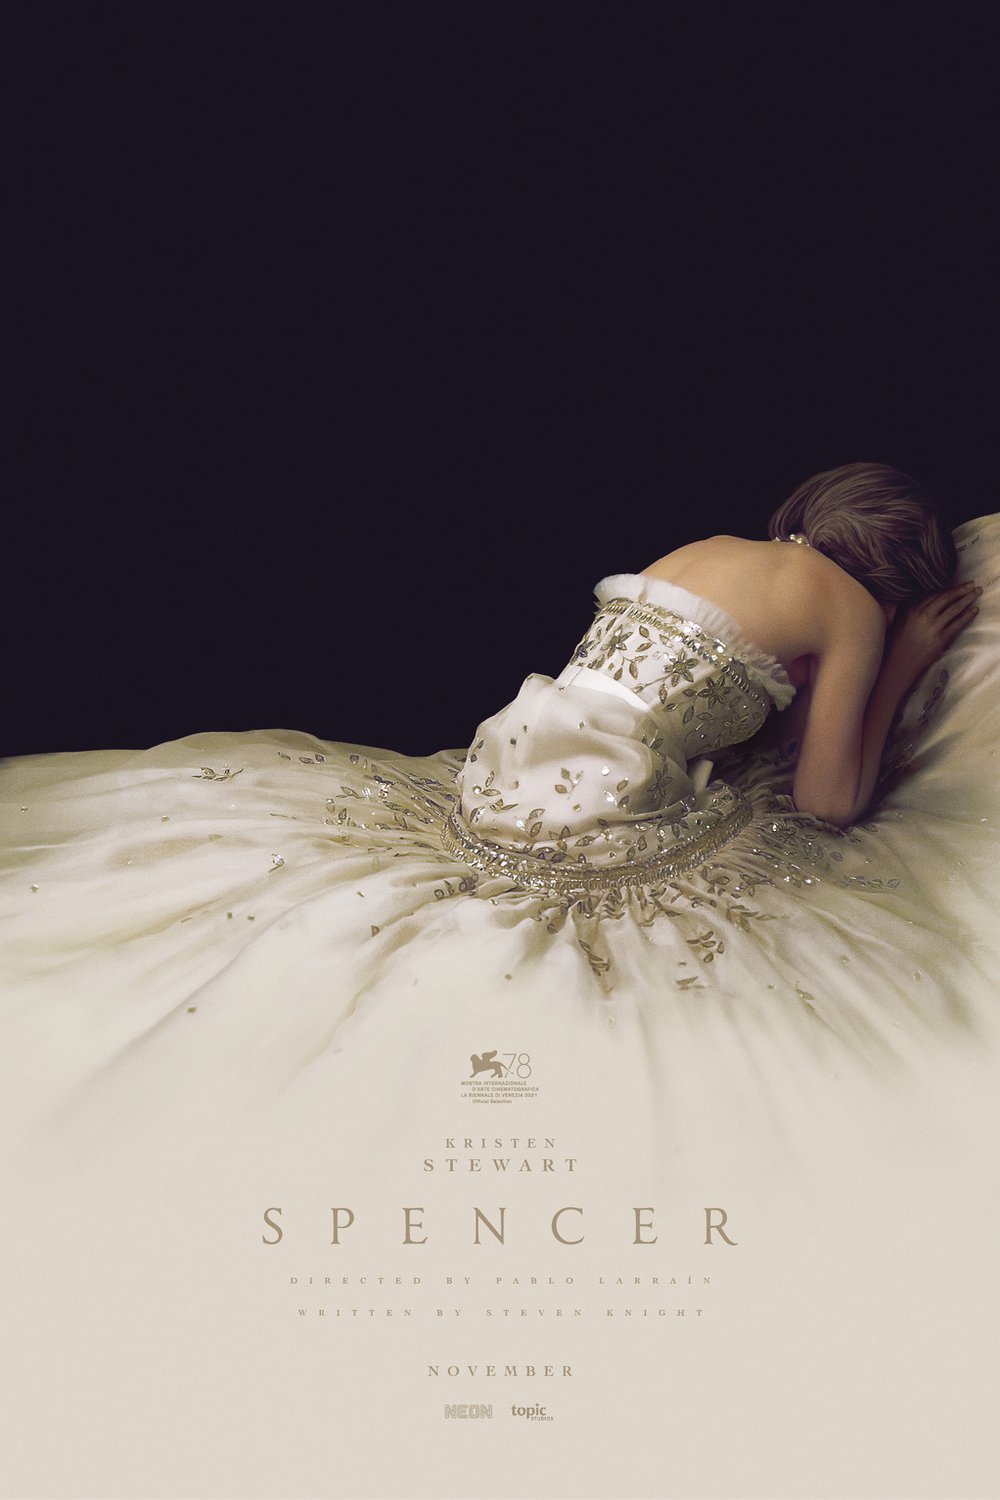 Poster of the movie Spencer